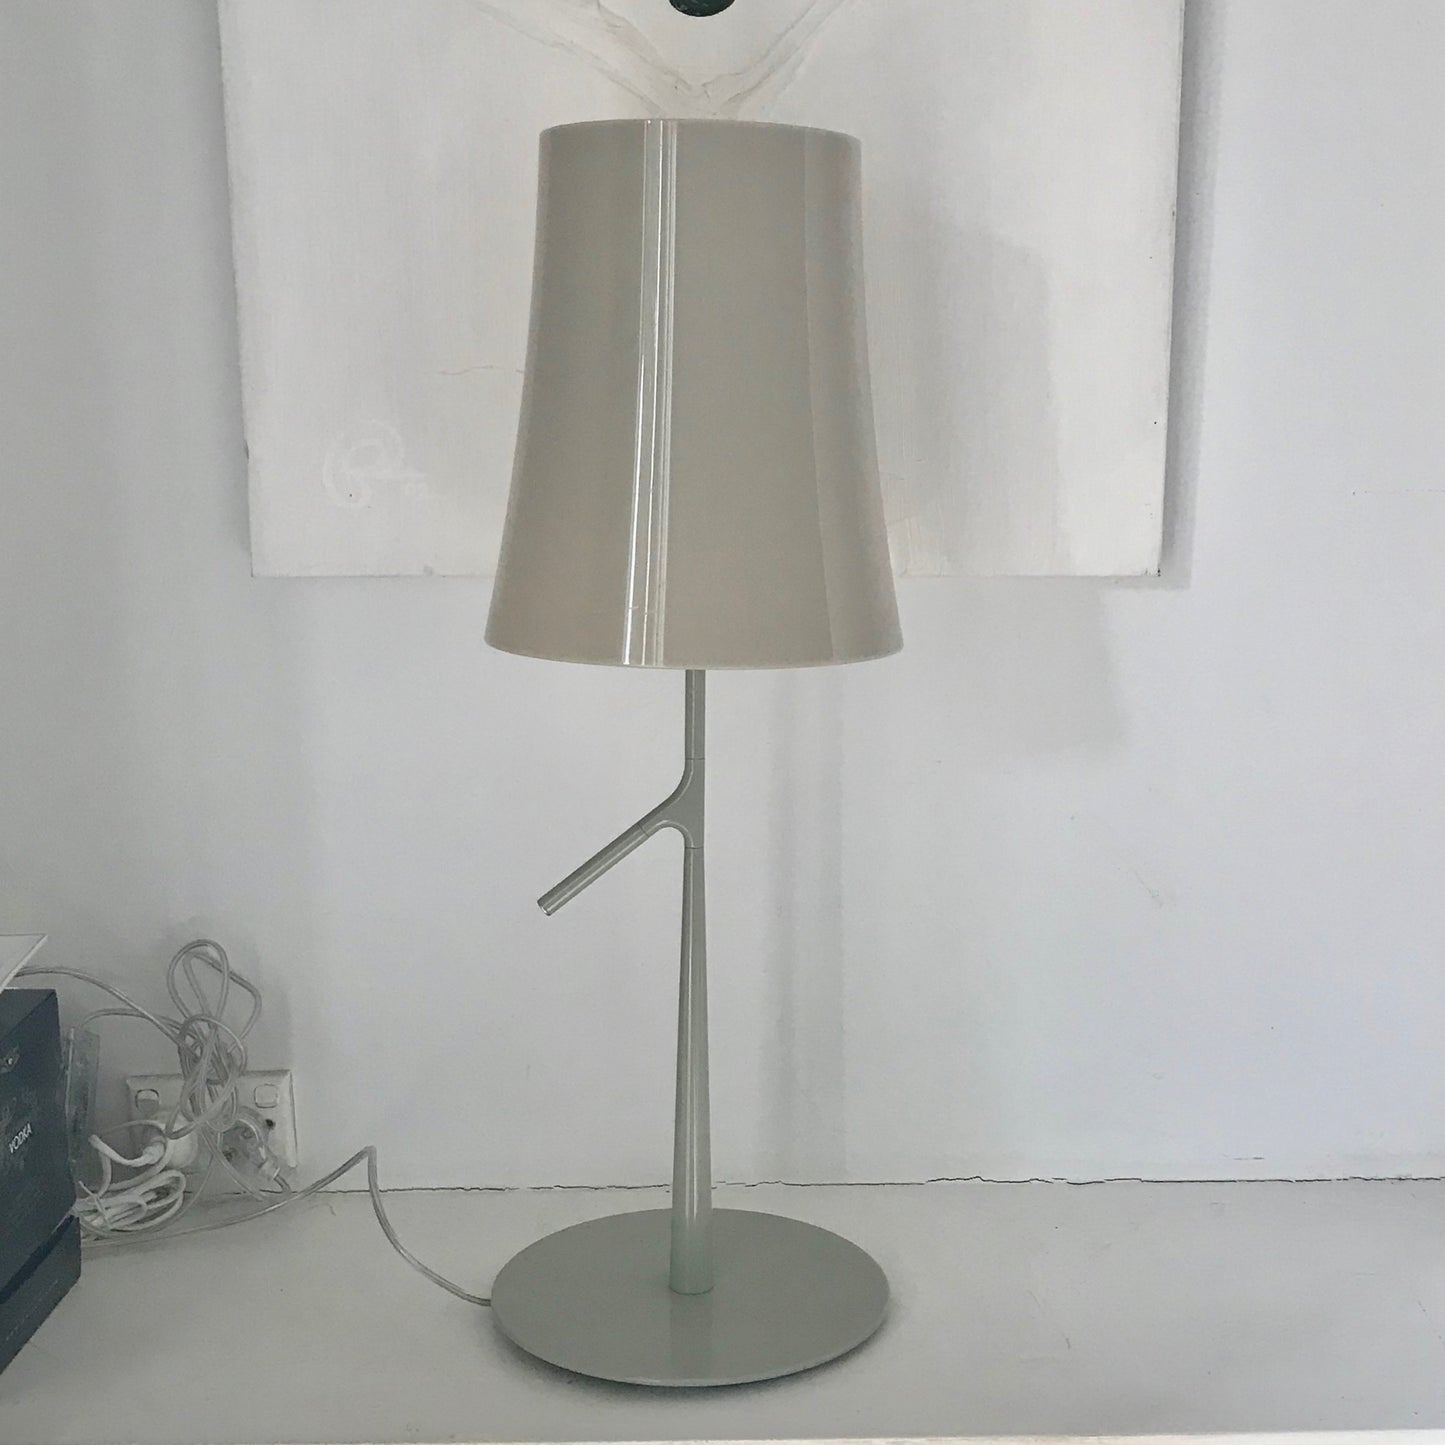 Birdie Table Lamp by Ludovica & Roberto Palomba for Foscarini (2 available)